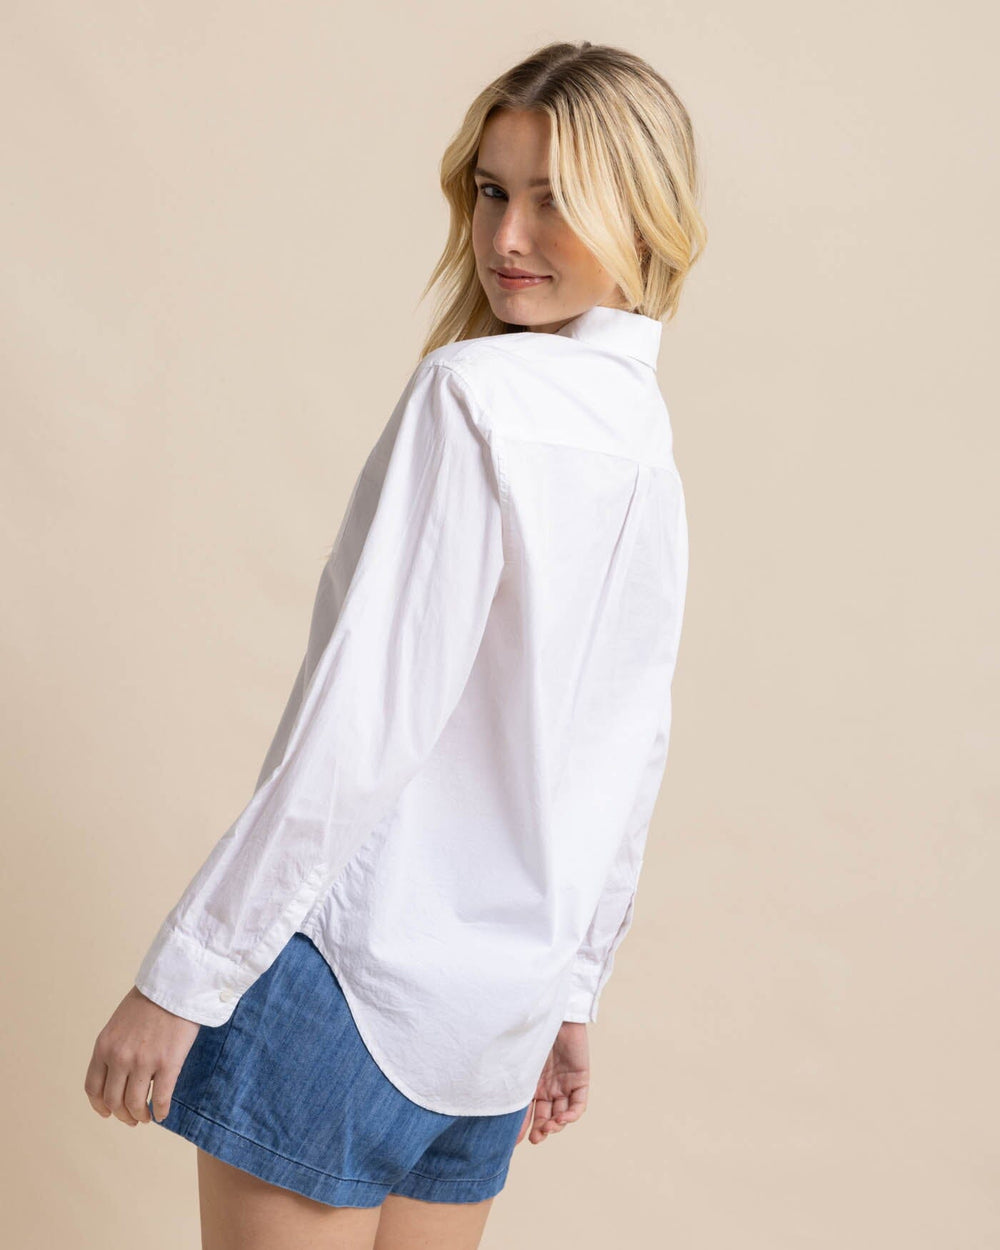 The back view of the Southern Tide Katherine Poplin Shirt by Southern Tide - Classic White